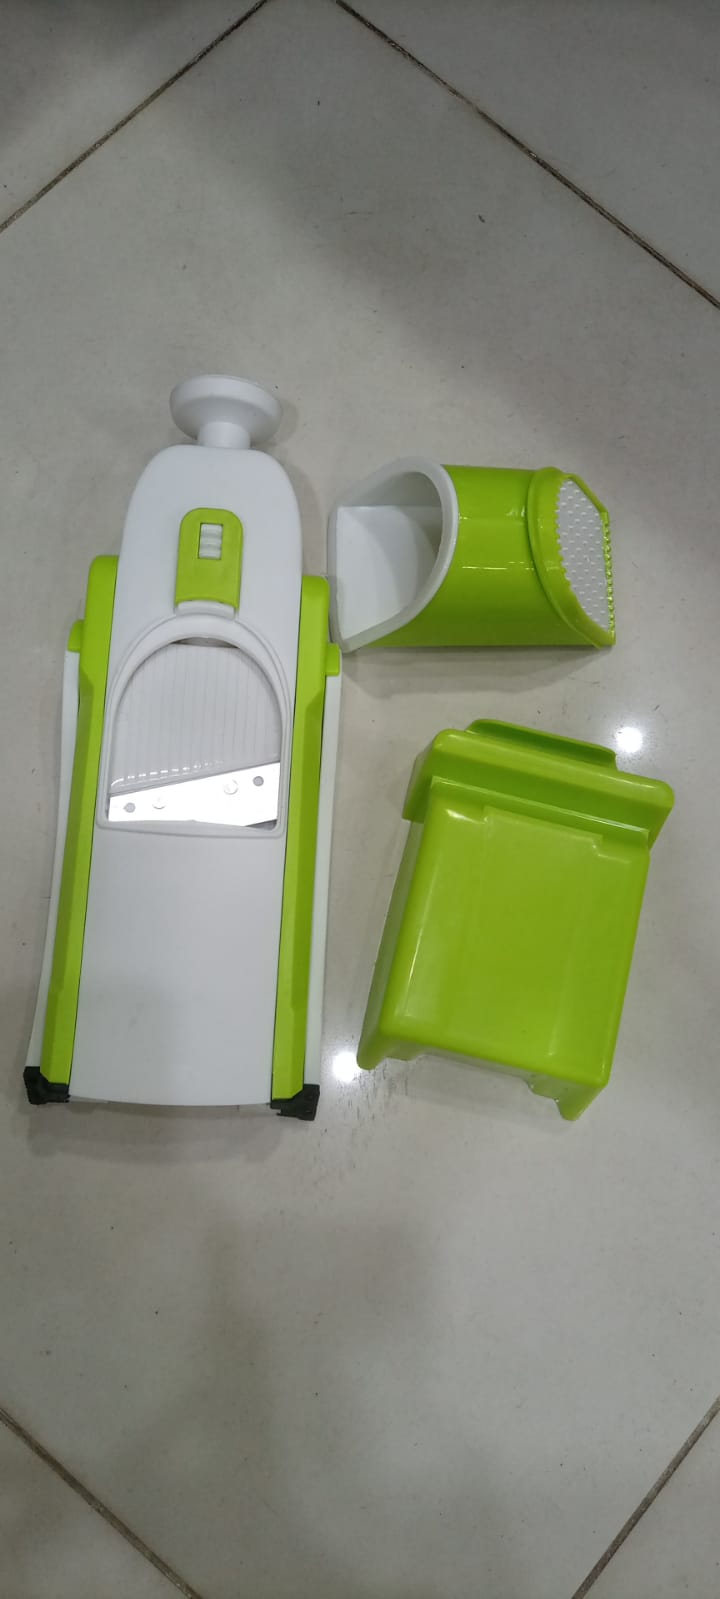 4 In 1 Vegetable Cutter Chopper Adjustable Multi-function Cutter